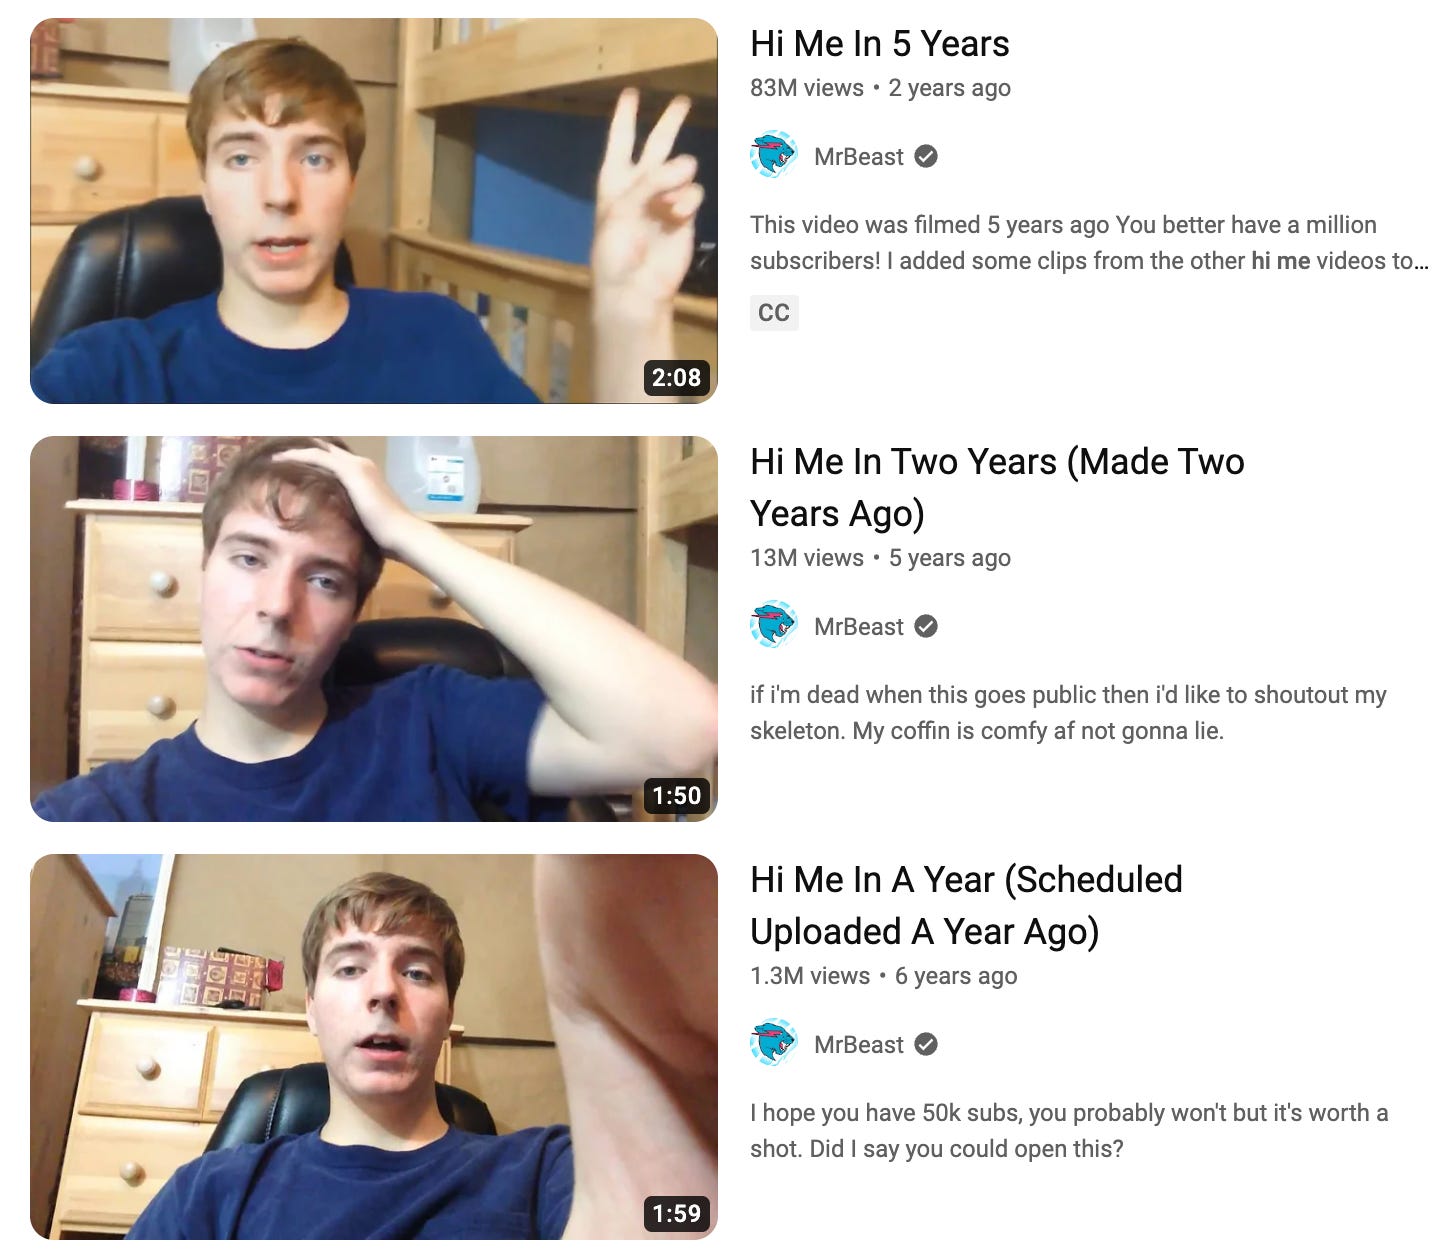 MrBeast has got multiple videos scheduled that will only be released once  he's died